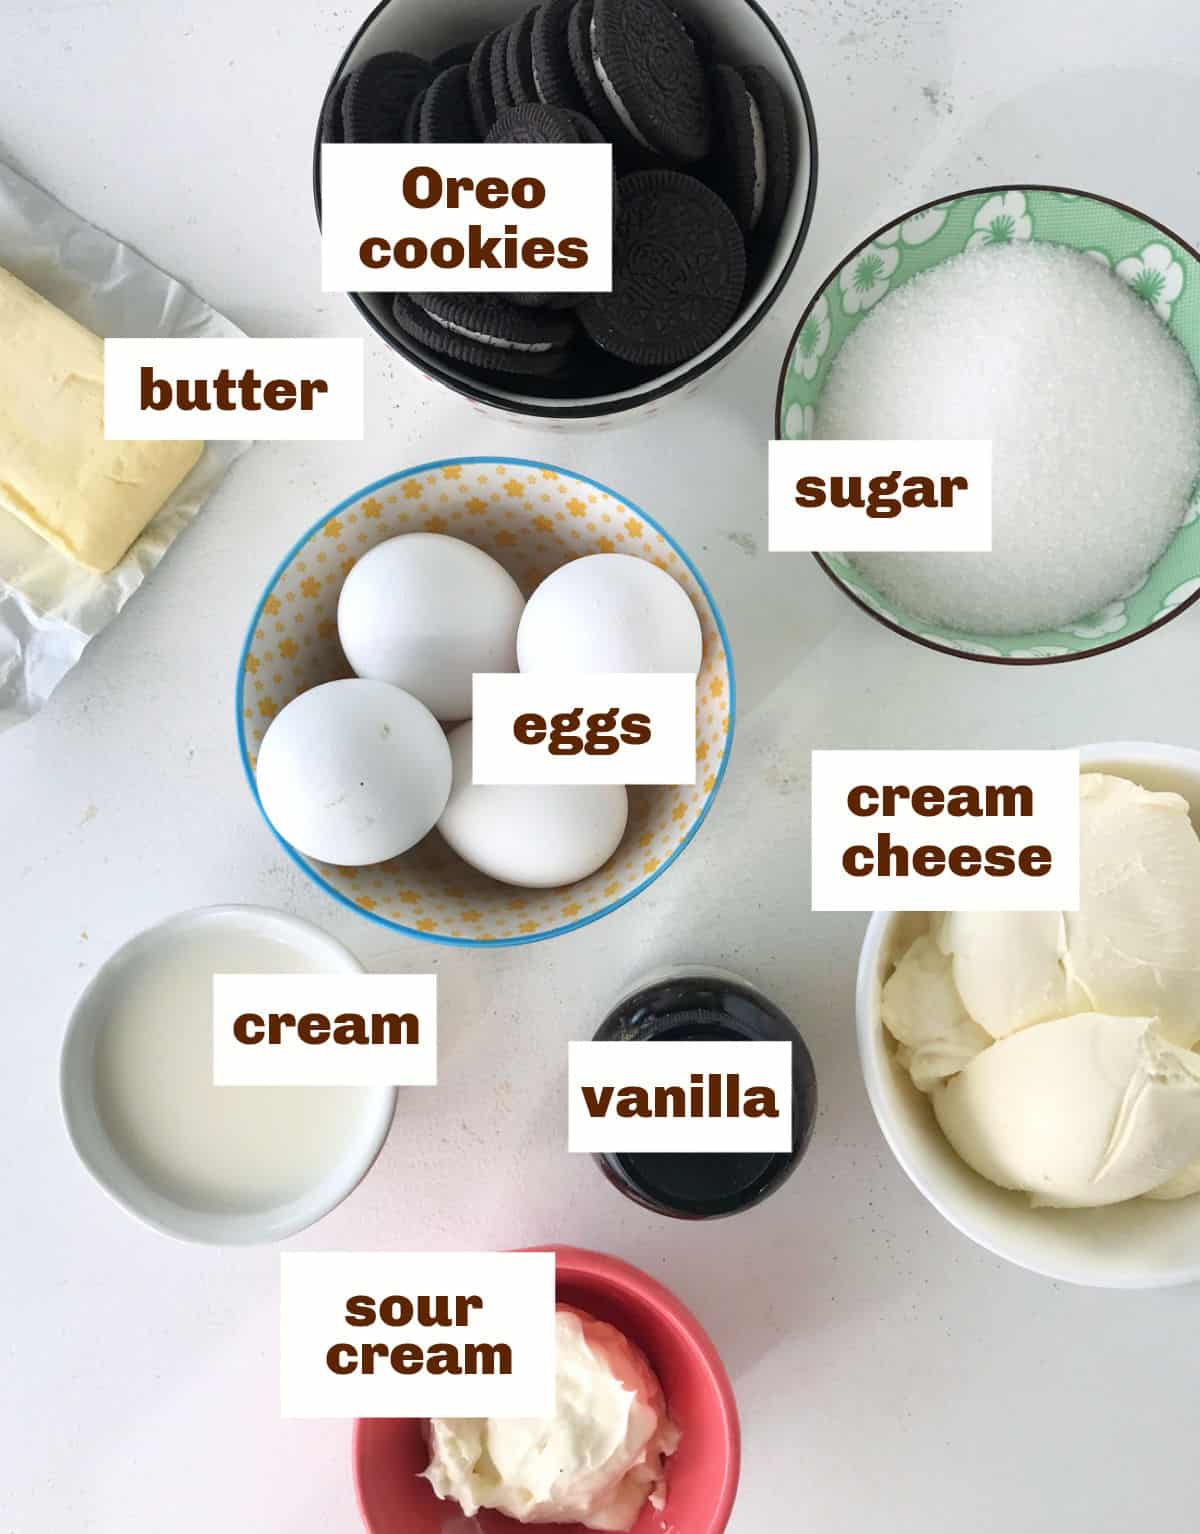 White surface with colorful bowl containing Oreo cheesecake ingredients such as eggs, cream cheese and butter